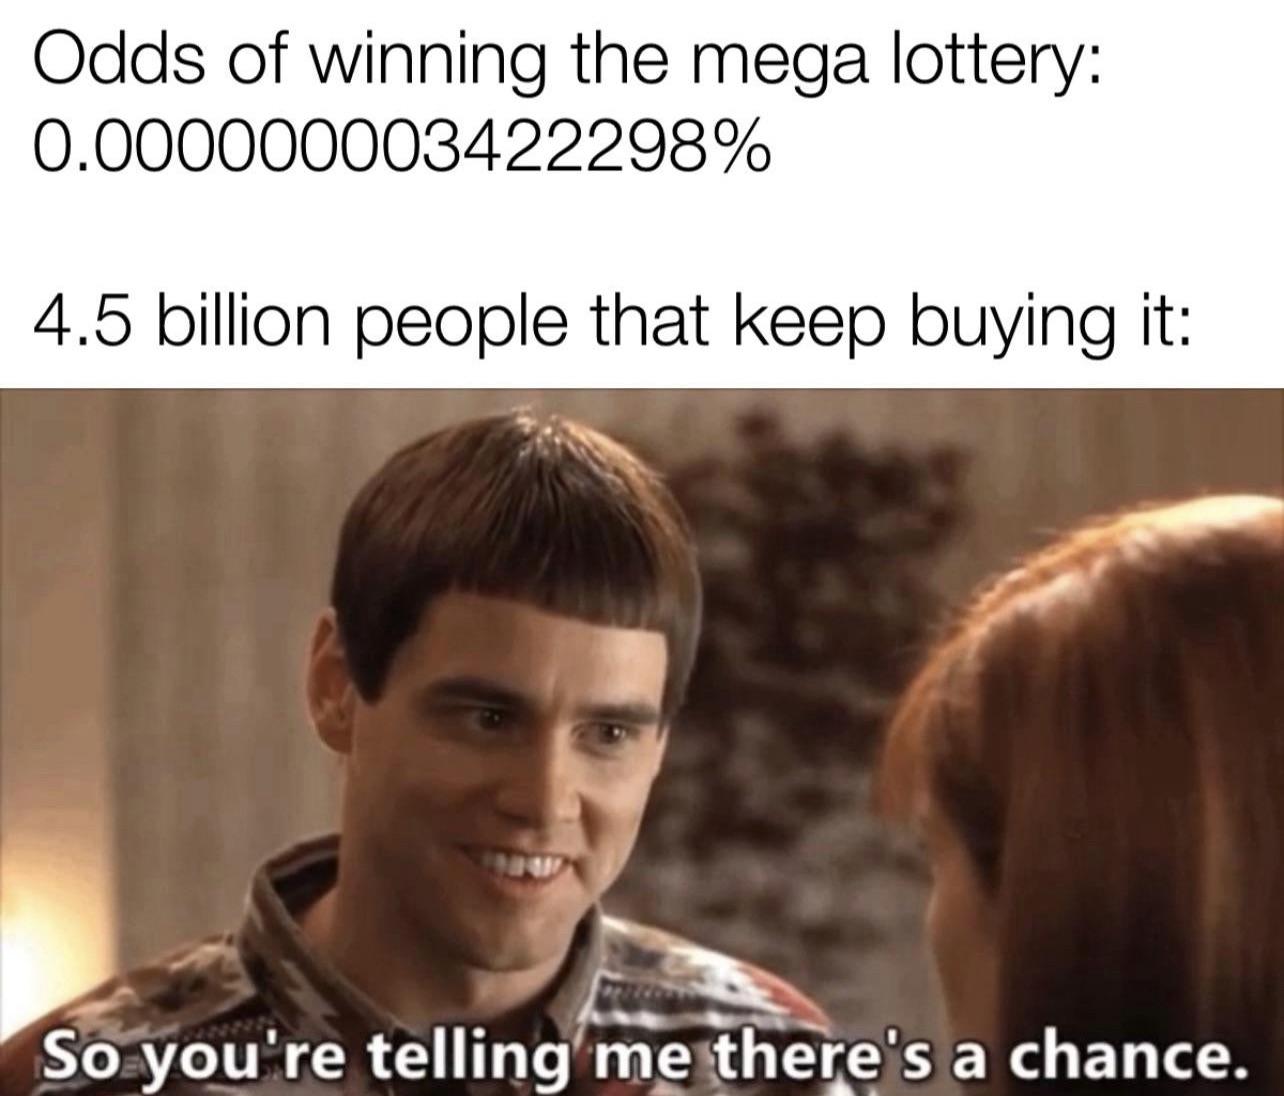 so you re saying there's - Odds of winning the mega lottery 0.000000003422298% 4.5 billion people that keep buying it So you're telling me there's a chance.